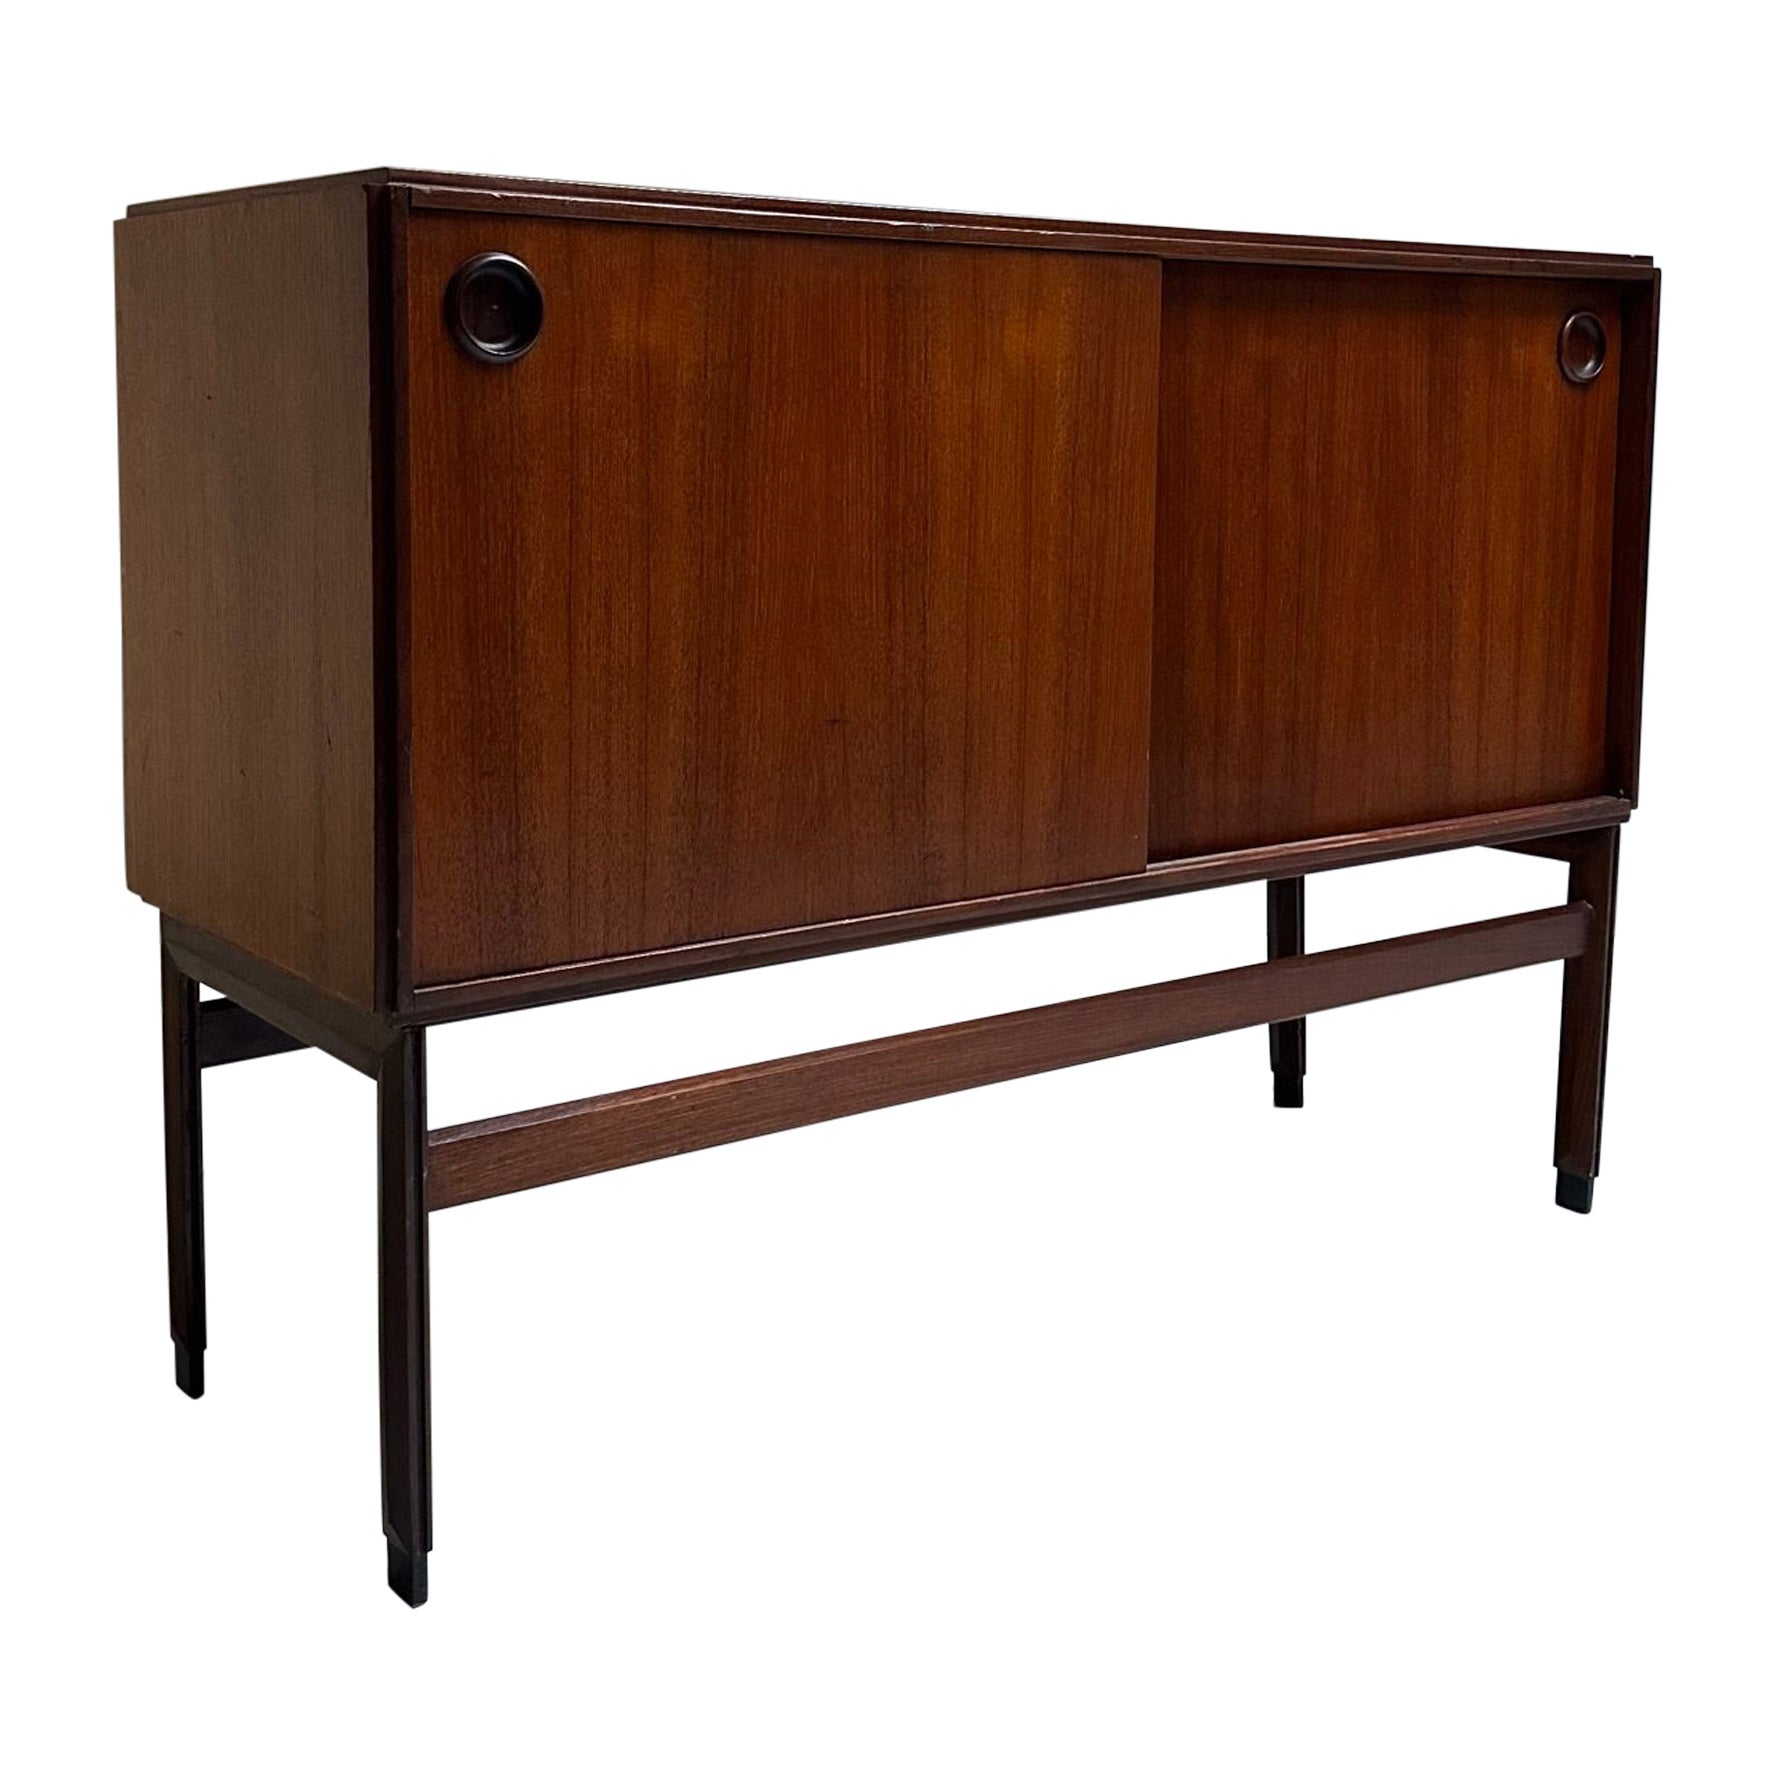 Mid-Century Modern Small Sideboard from the 1960s, Italian manufacturing in teak